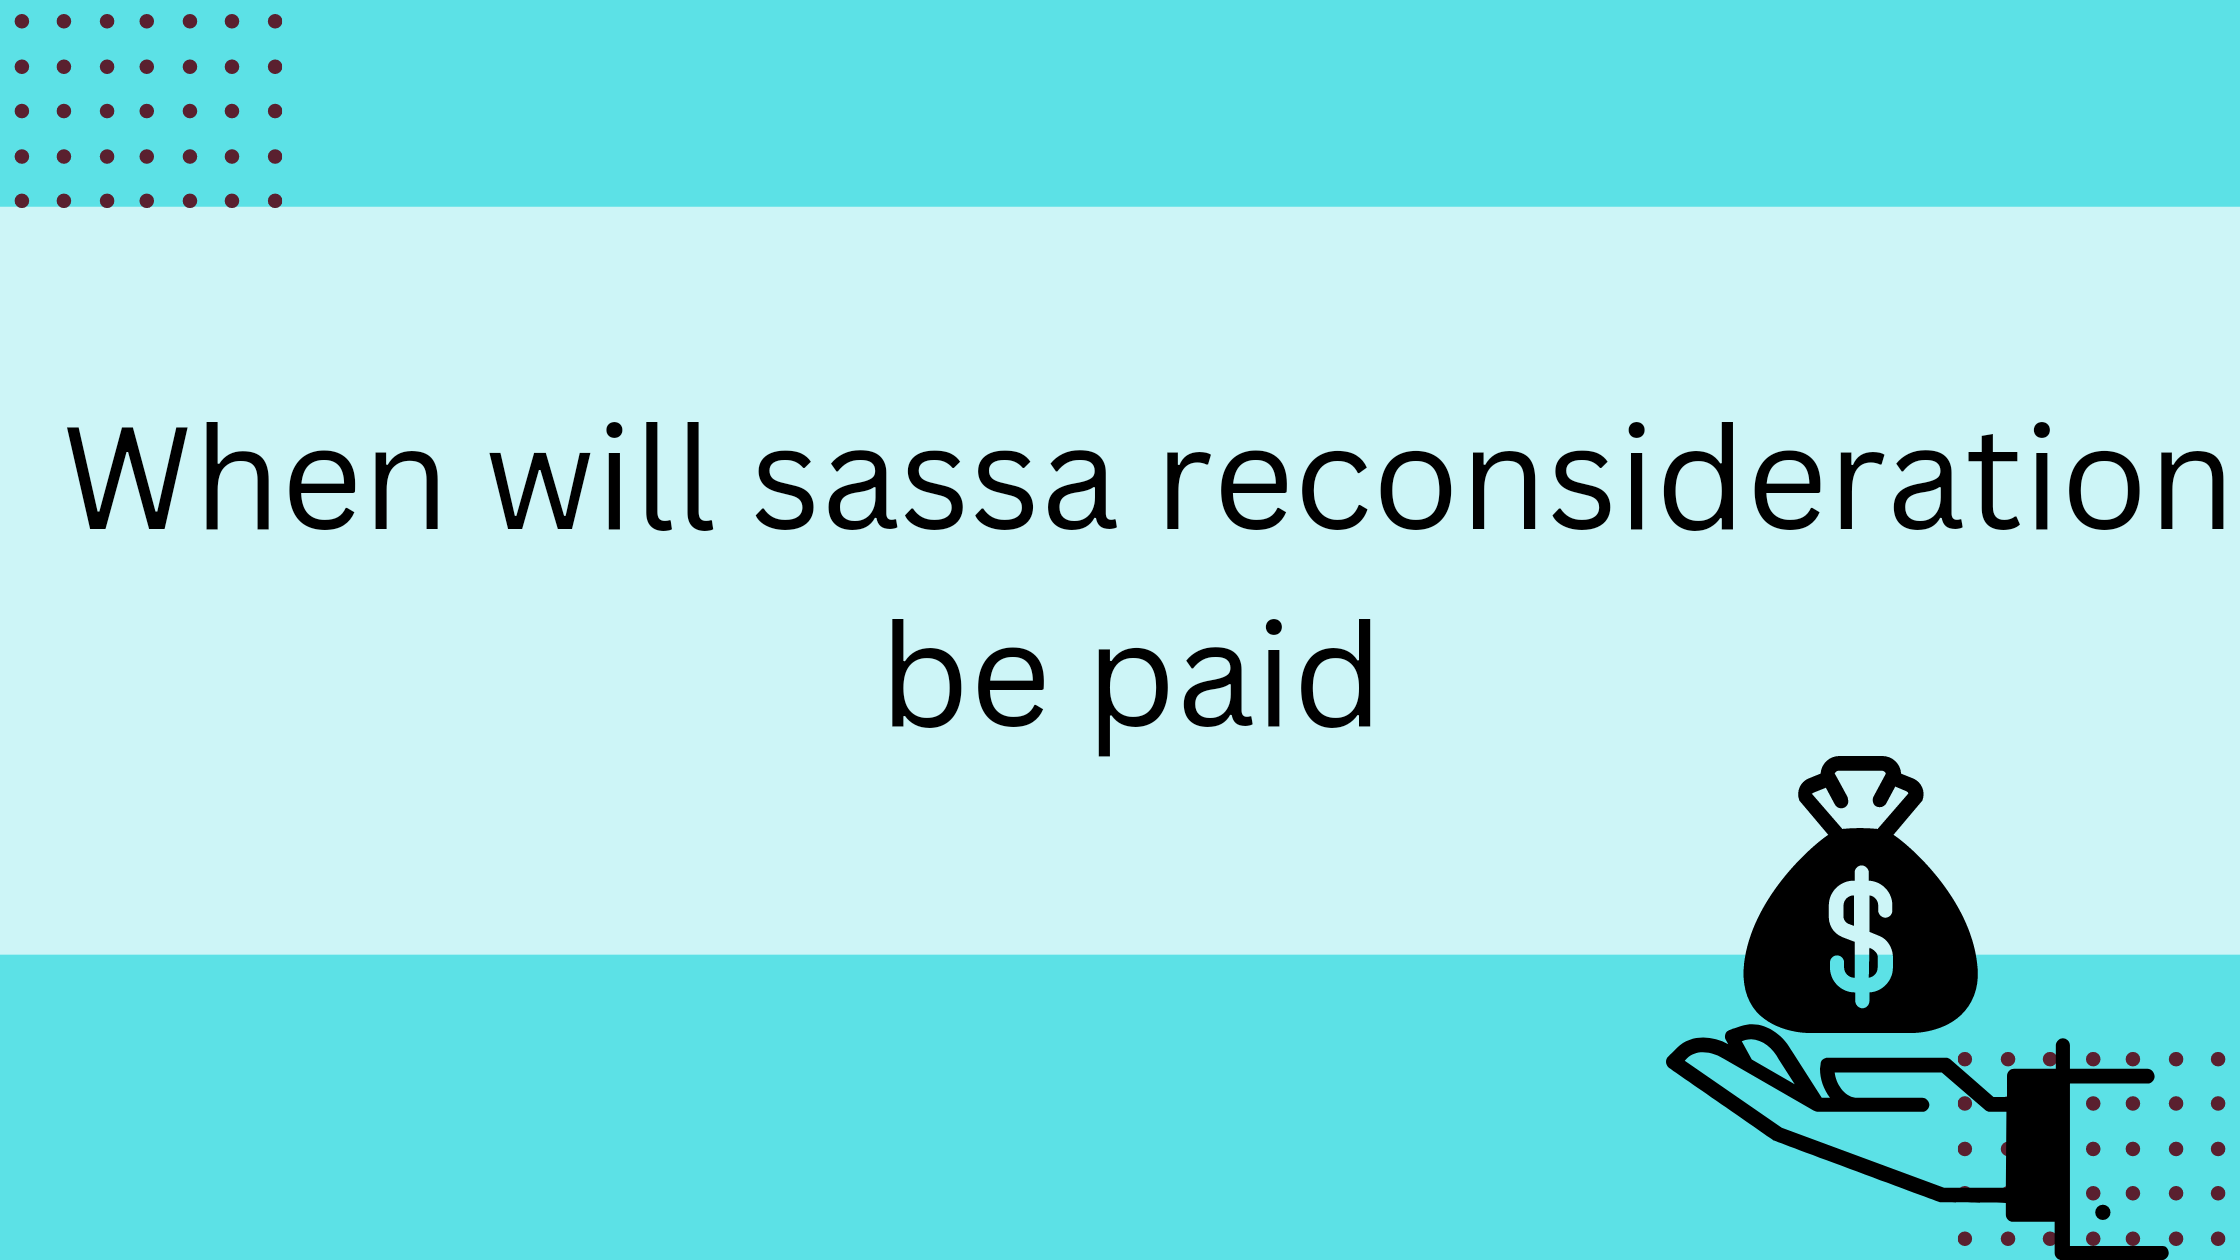 When will sassa reconsideration be paid